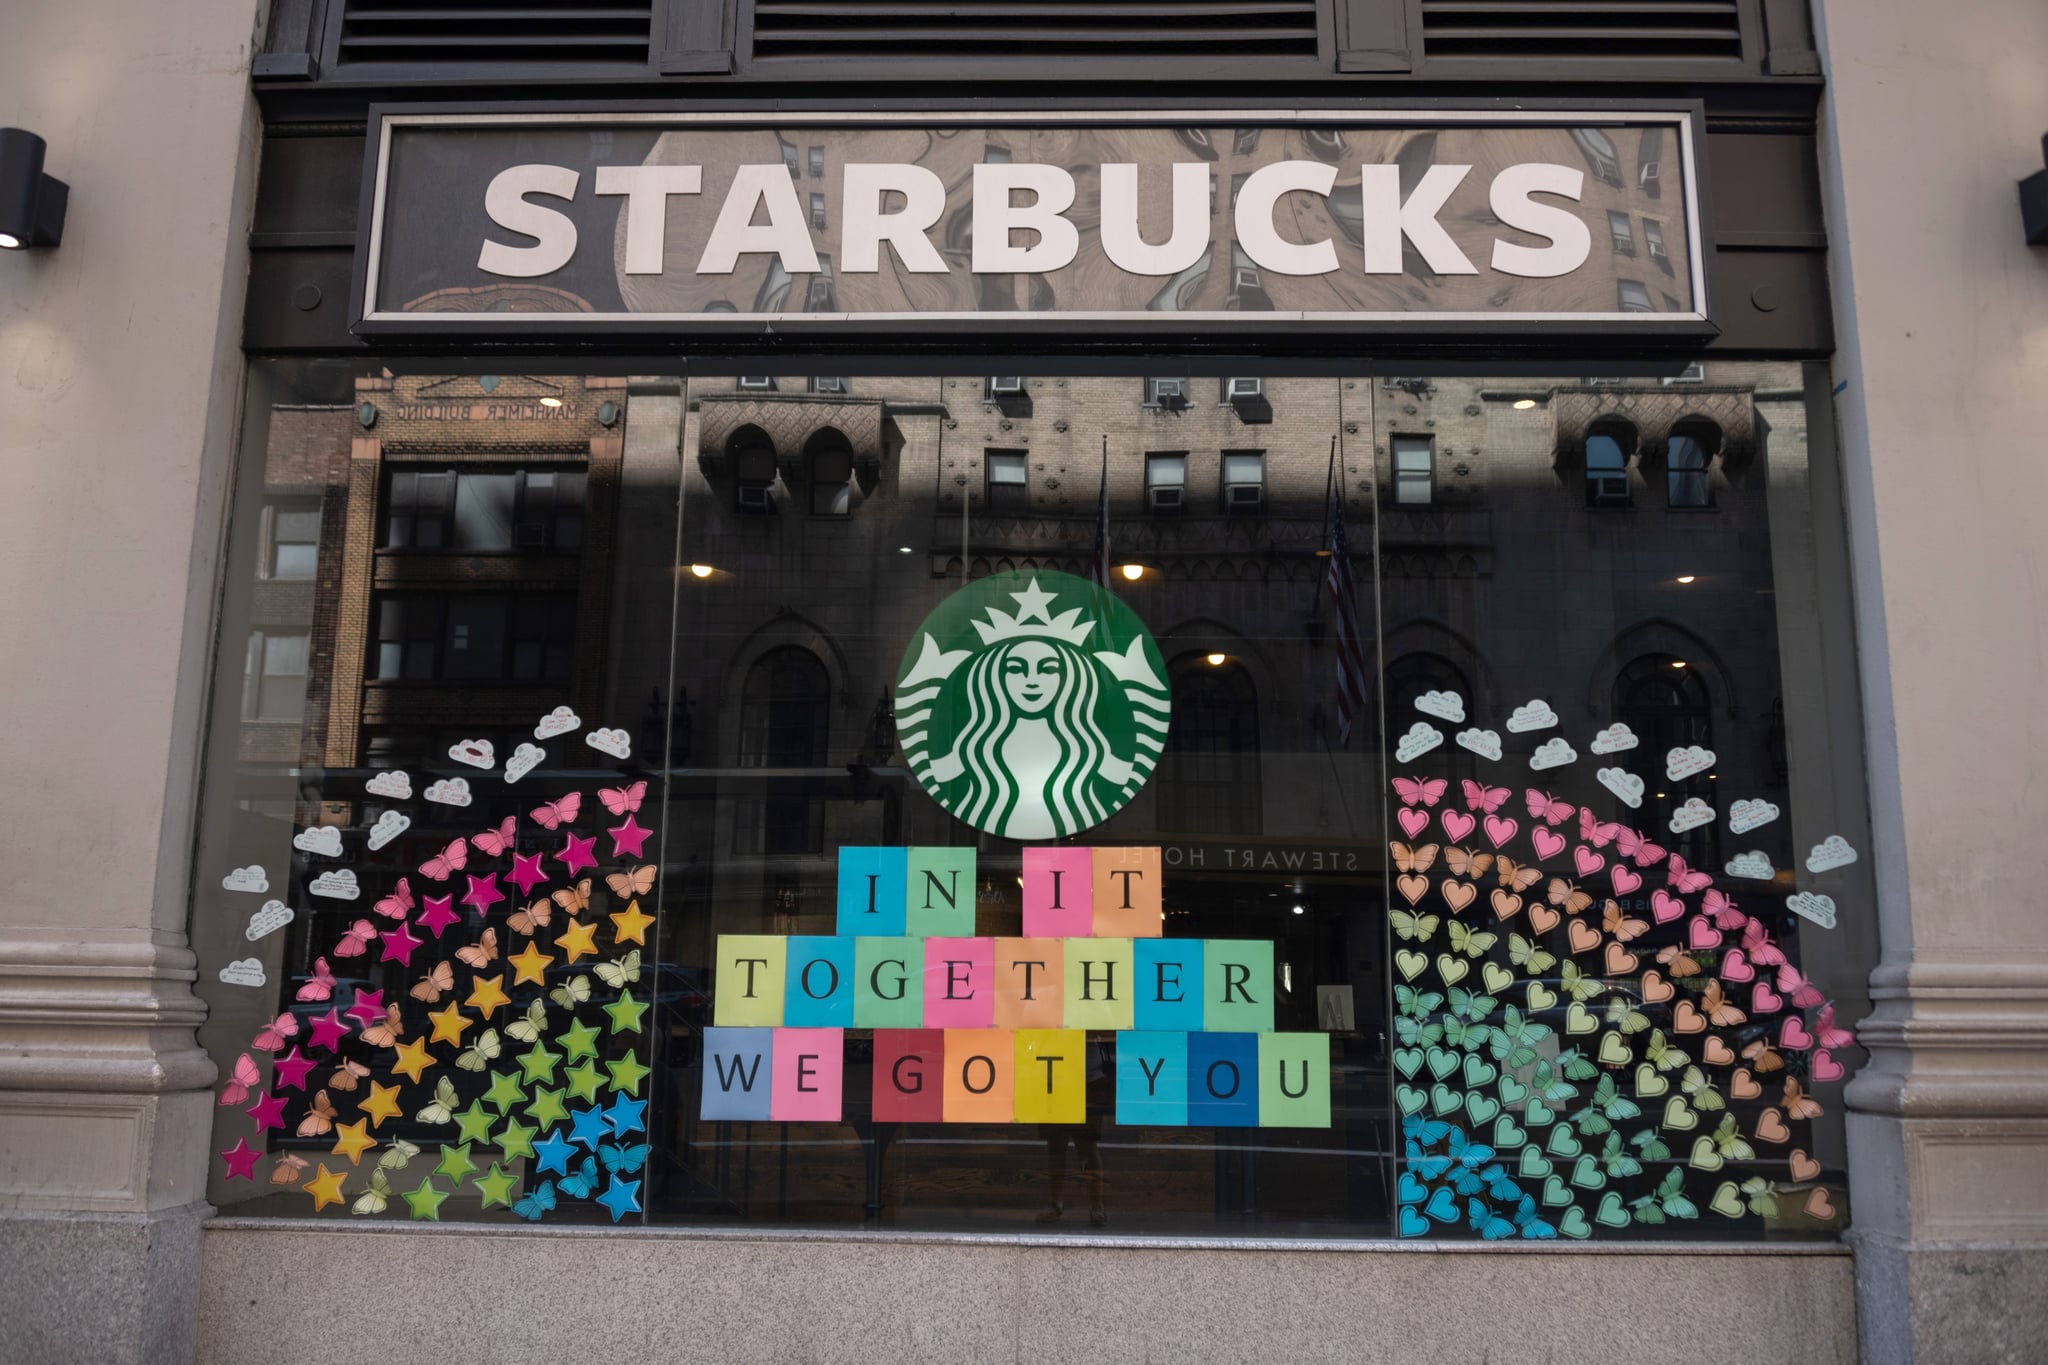 NEW YORK, NEW YORK - JUNE 21: The view of a Starbucks coffee shop displaying pride colours on June 21, 2020 in New York City. Due to the ongoing Coronavirus pandemic, this year's pride march had to be cancelled over health concerns. The annual event, which sees millions of attendees, marks it's 50th anniversary since the first march following the Stonewall Inn riots. (Photo by Alexi Rosenfeld/Getty Images)